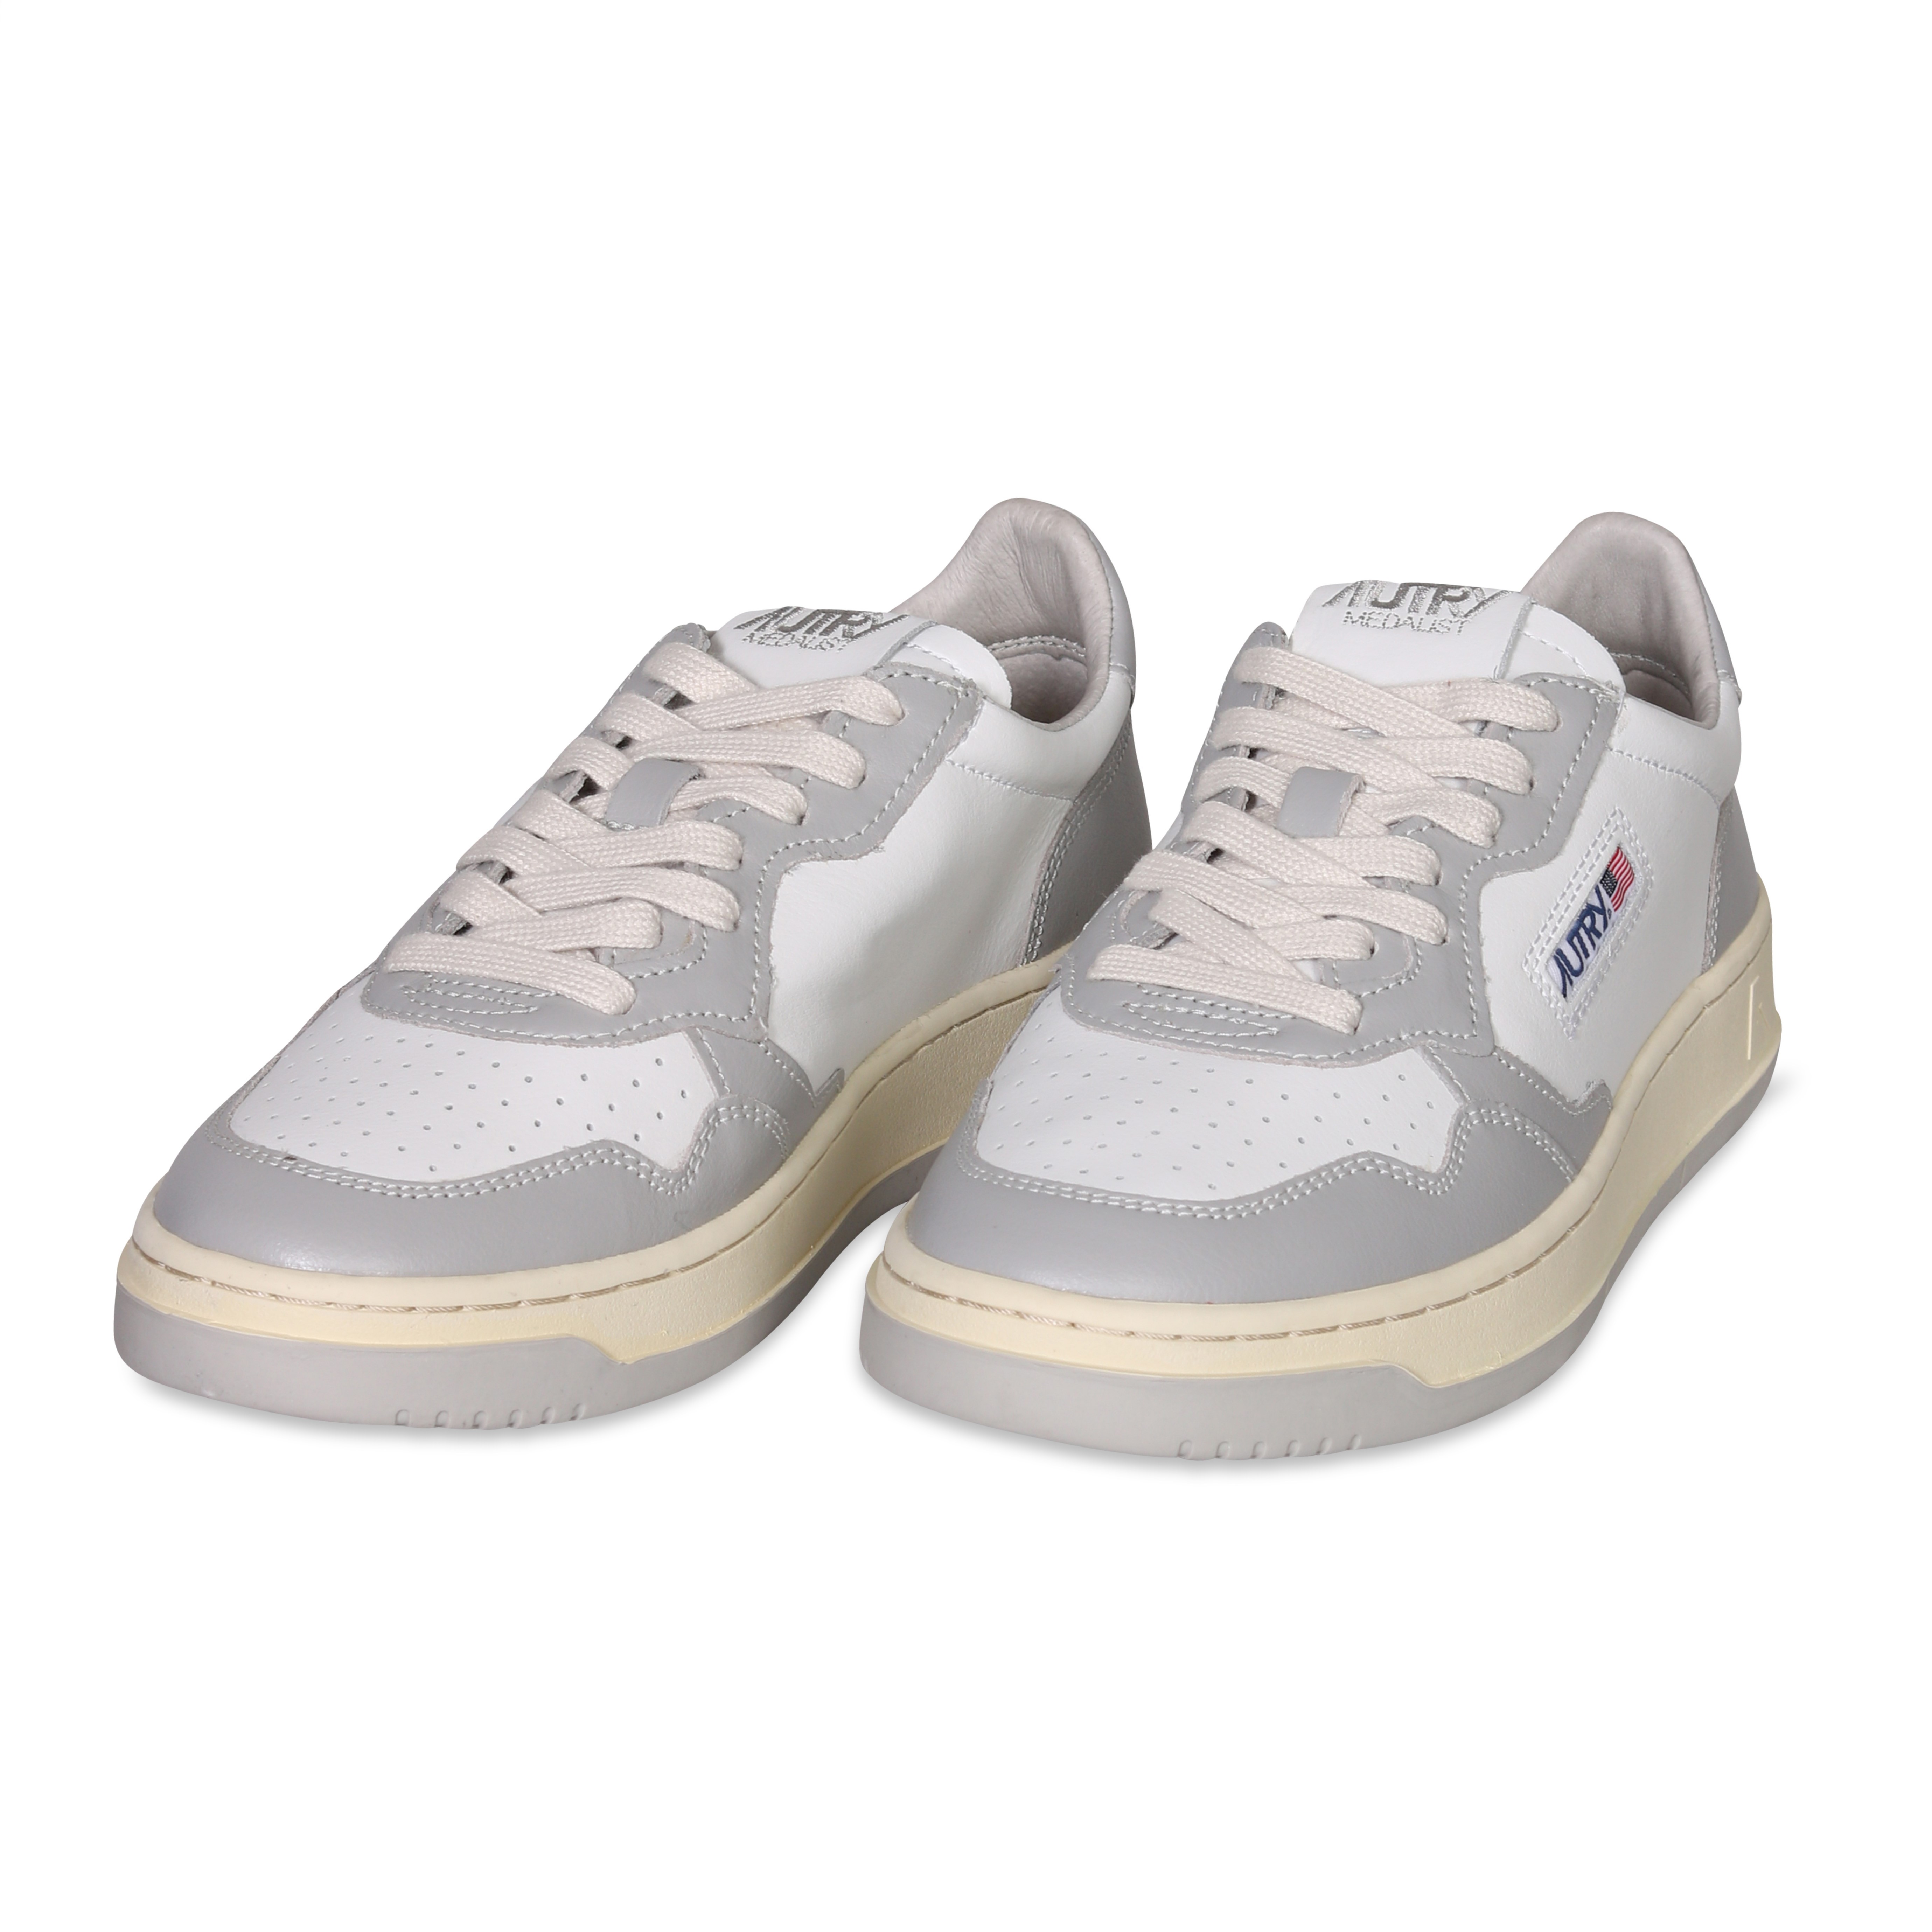 Autry Action Shoes Sneaker White/Grey